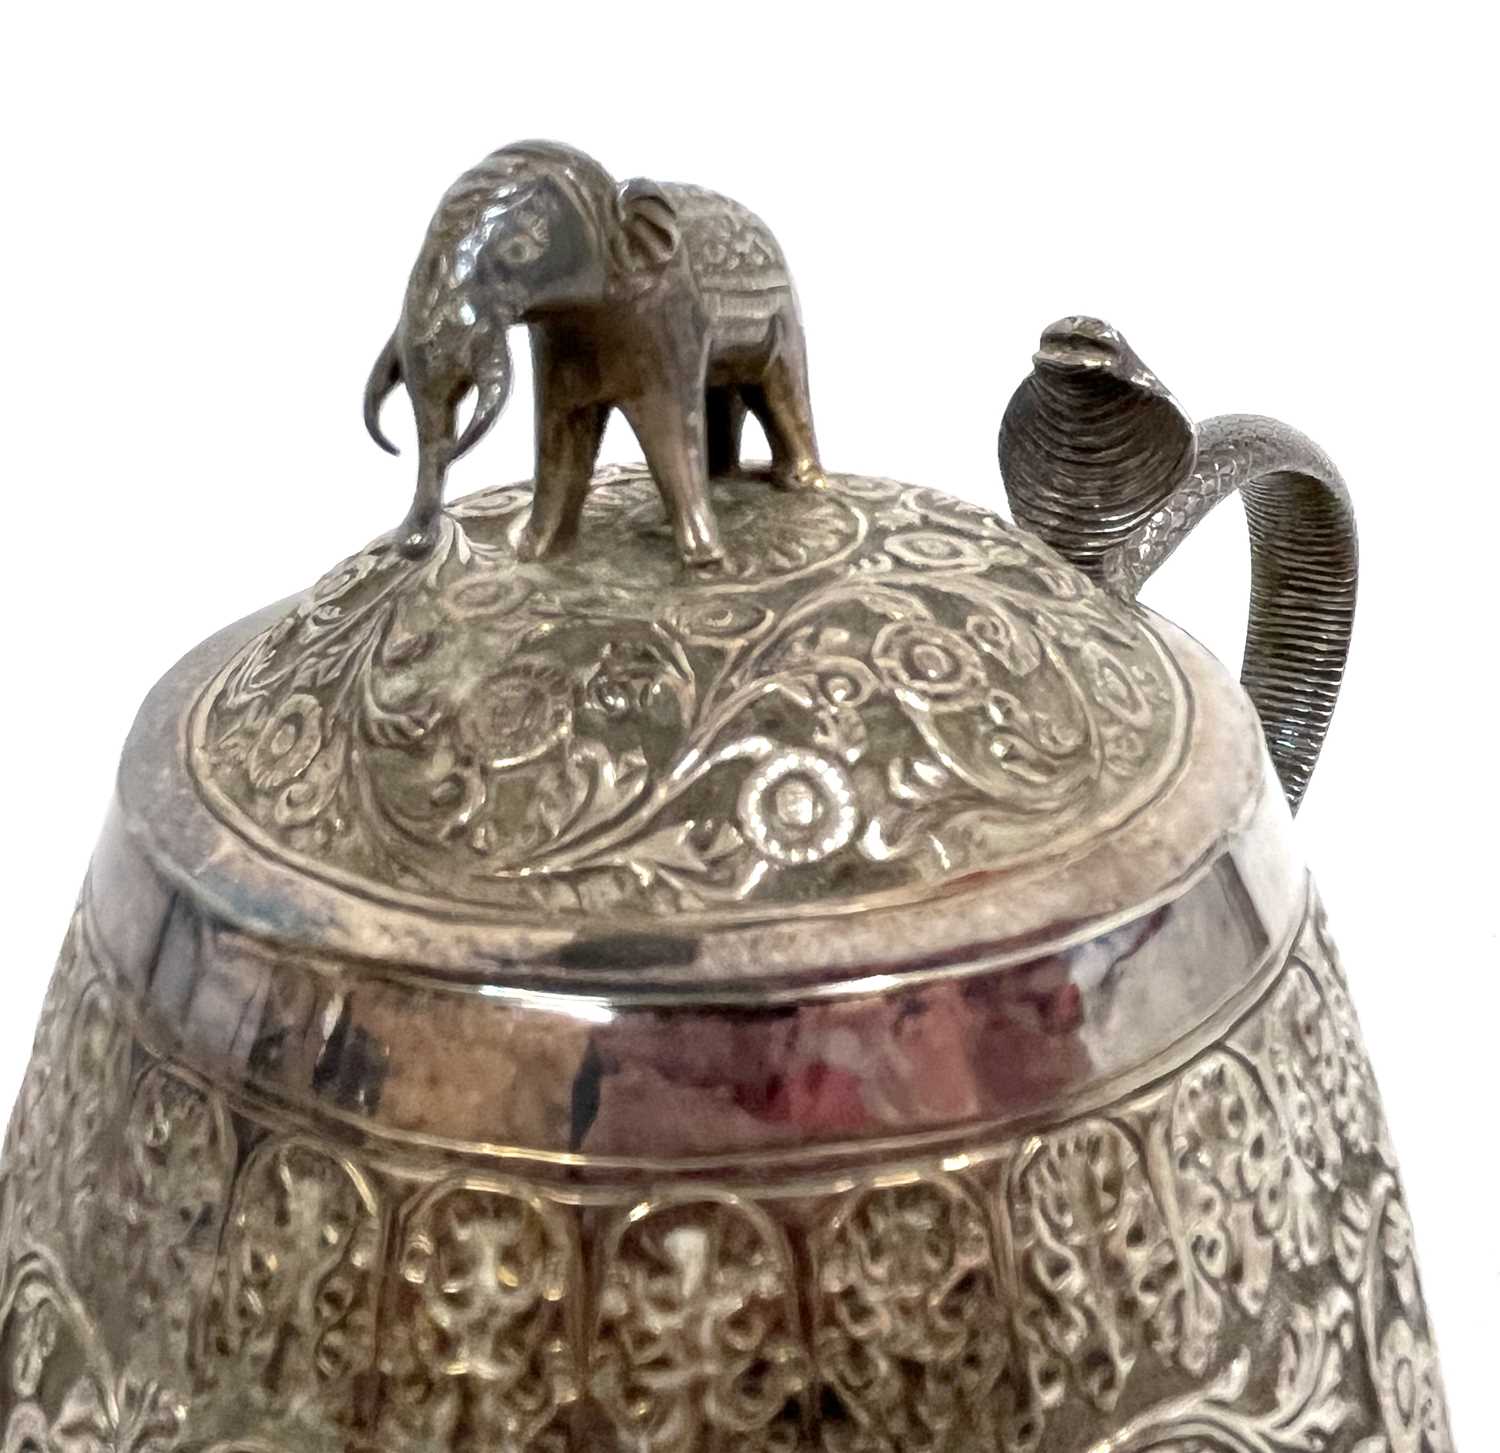 Antique Indian silver tea set 'Lucknow Circa 1900' with elephant and cobra design, comprising - Image 23 of 23